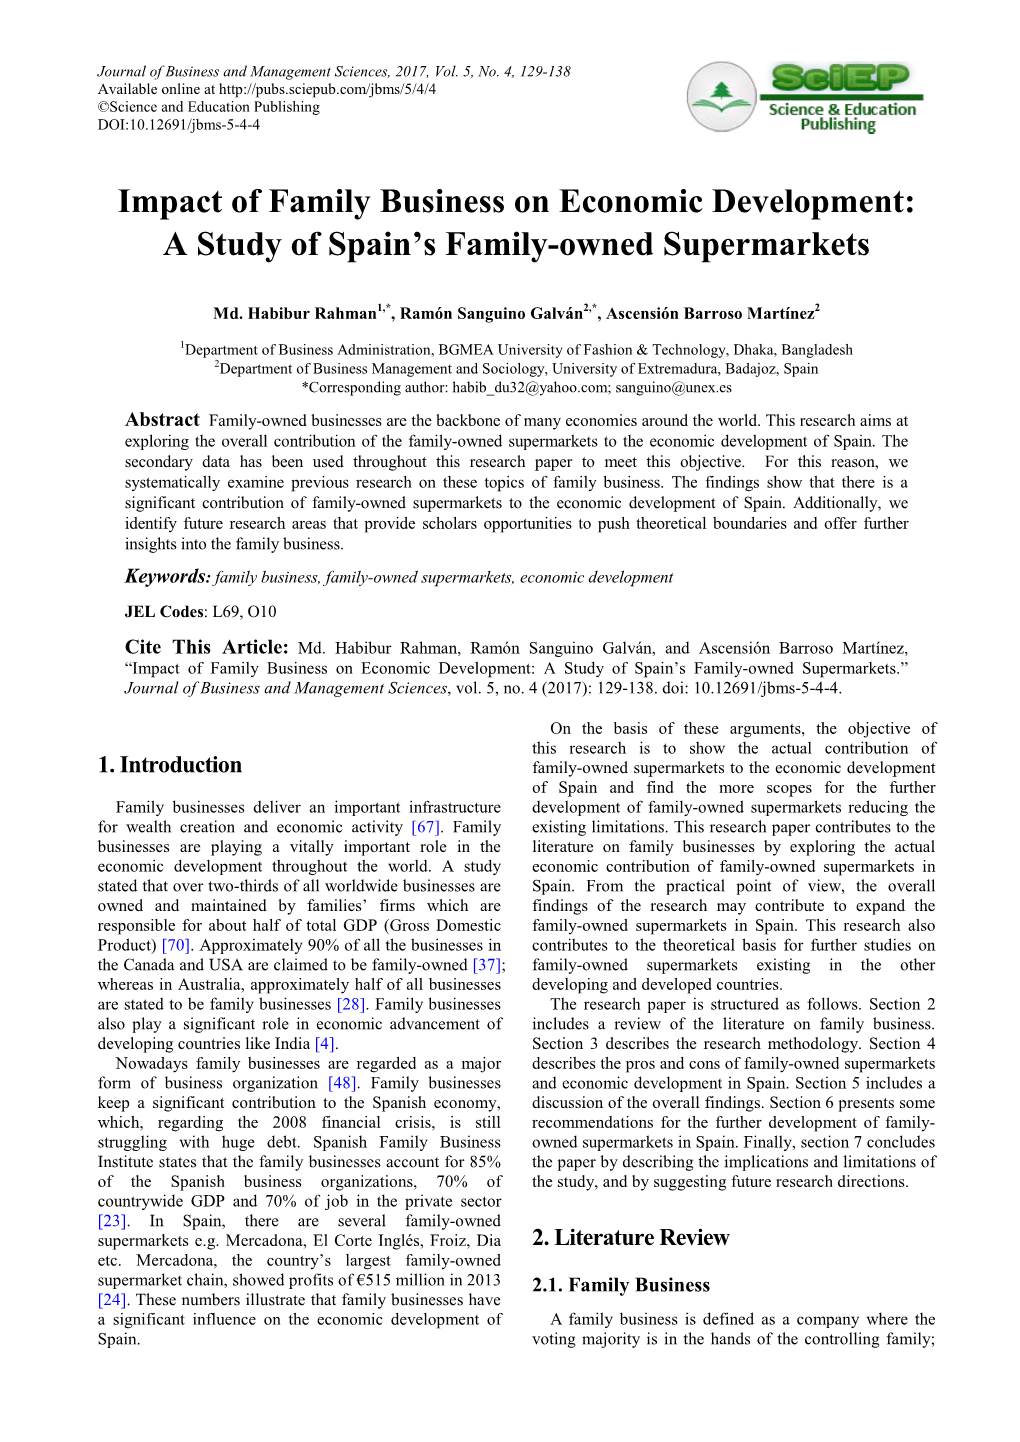 A Study of Spain's Family-Owned Supermarkets